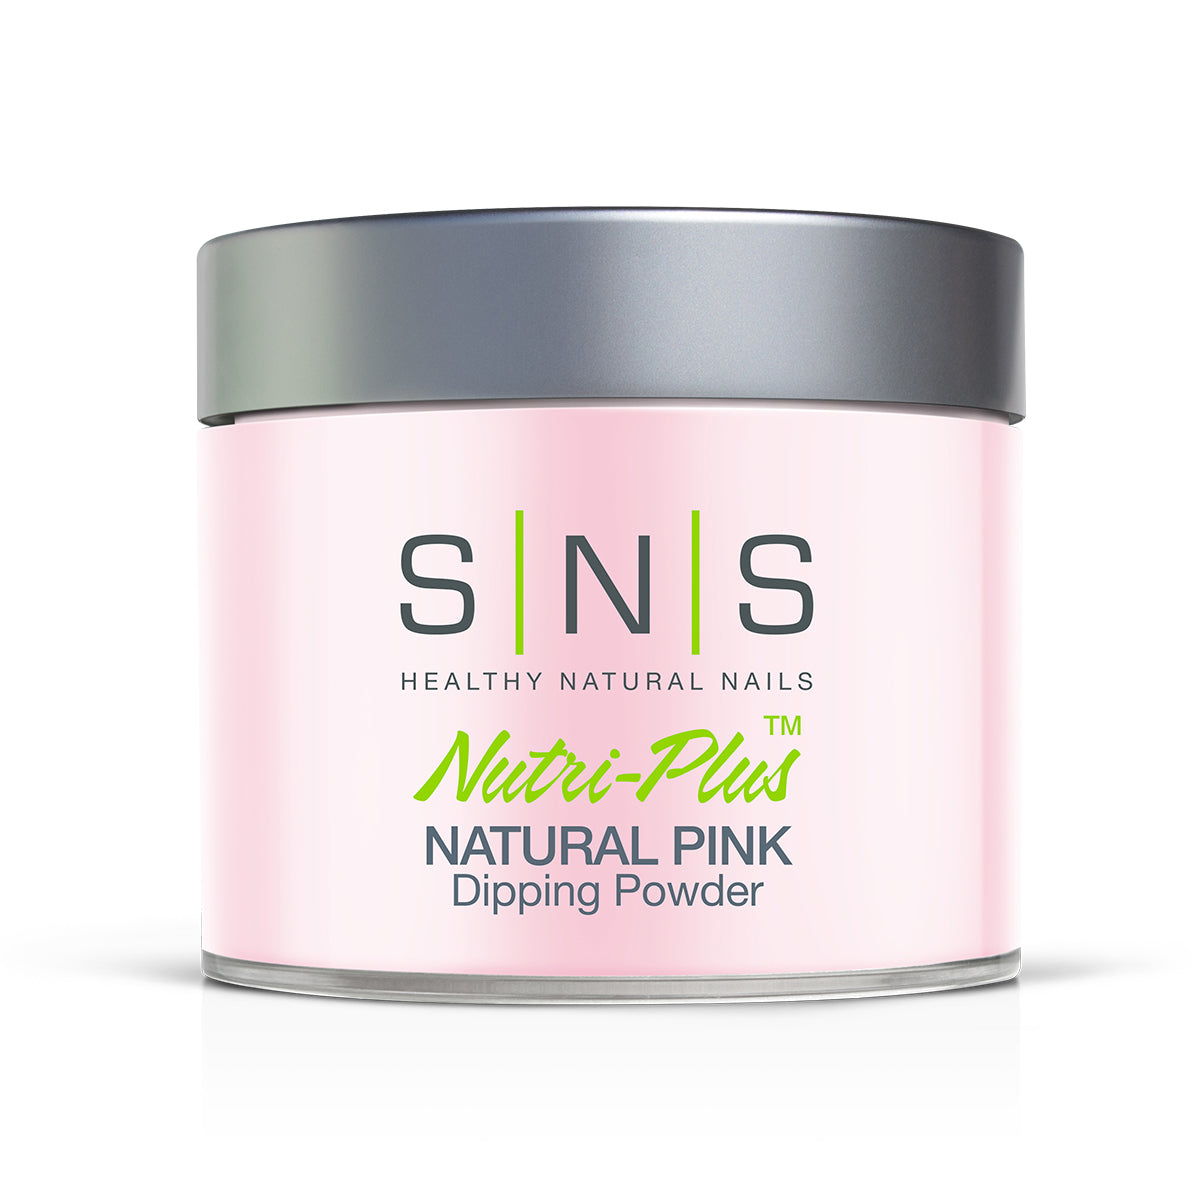 SNS Nutri-Plus French Dipping Powder Natural Pink 113g